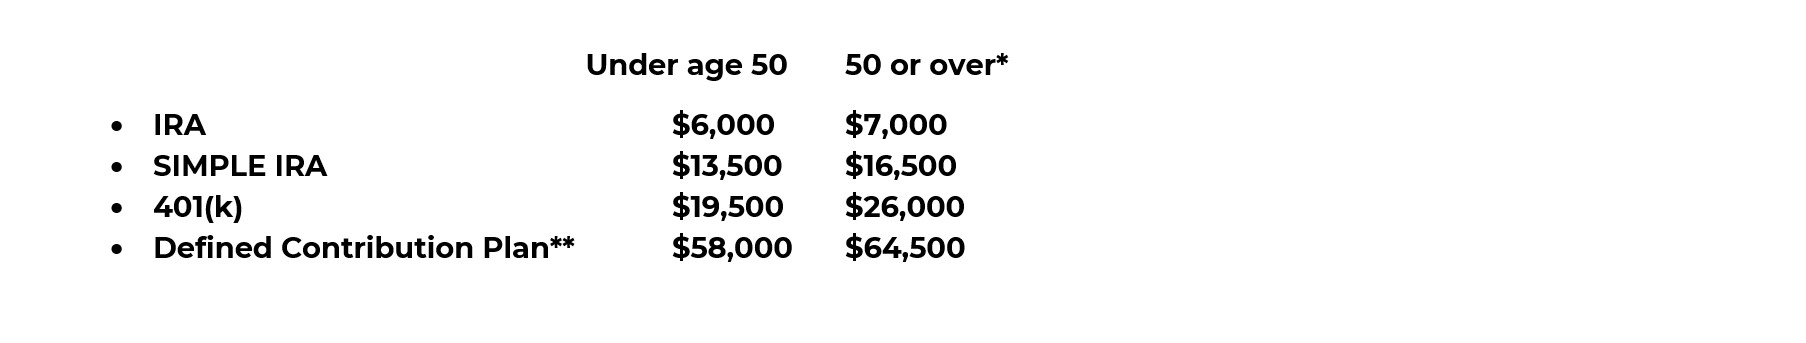 Chart shows the contribution limits for IRAs for those younger than 50 ($6,000) and those 50 and over ($7,000). Same with SIMPLE IRA ($14,500 vs. $16,500), 401(k) ($19,500 vs. $26,000) and Defined Contribution Plan ($58,000 vs. $64,500).